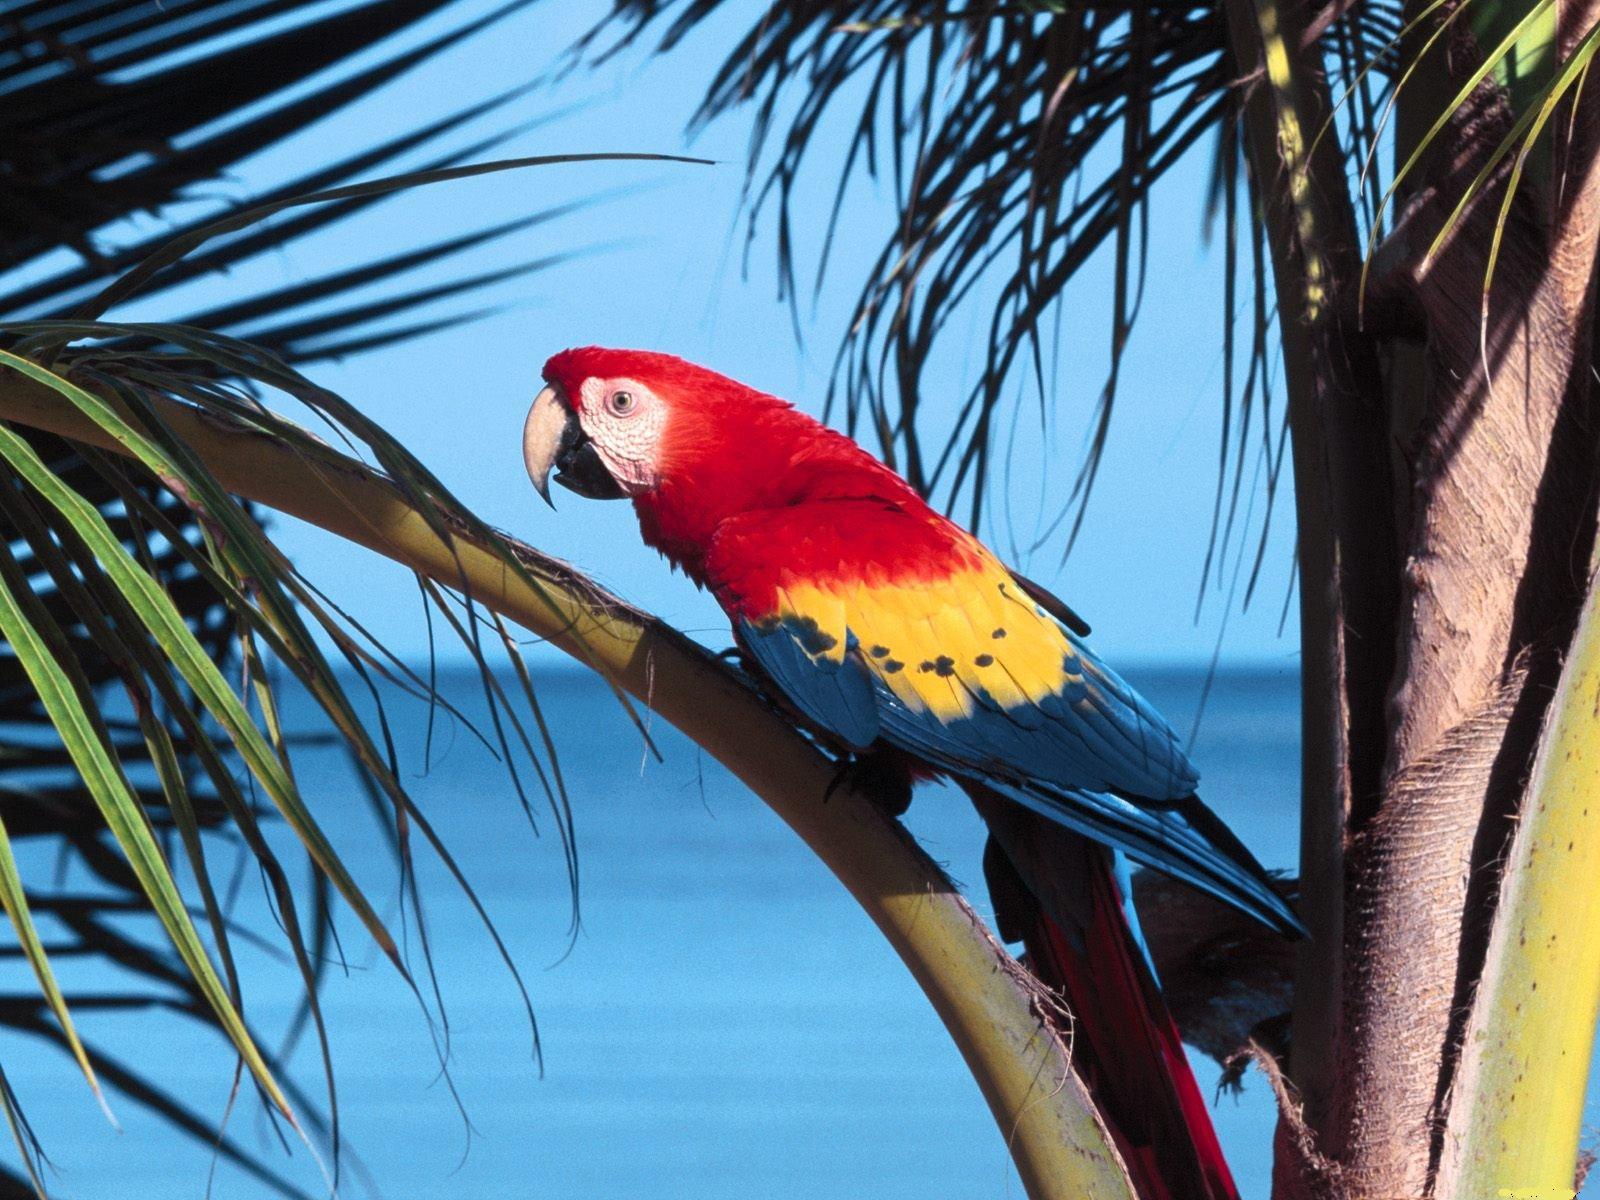 Mobile Desktop Background Hd Picture Of A Macaw Parrot